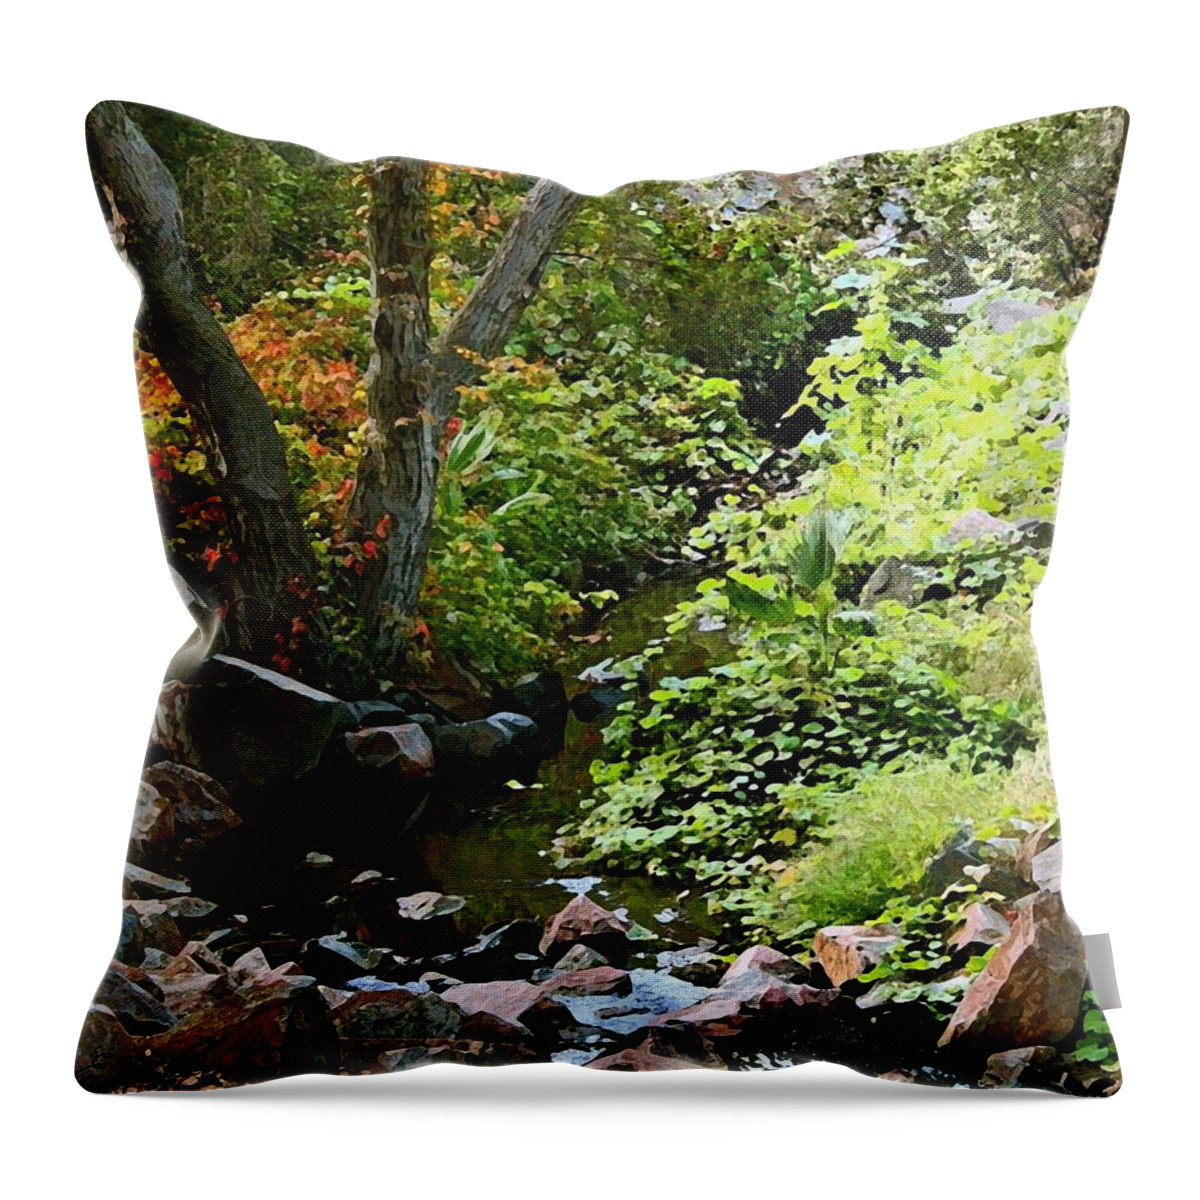 A Quiet Place Throw Pillow featuring the painting A Quiet Place by Ellen Henneke